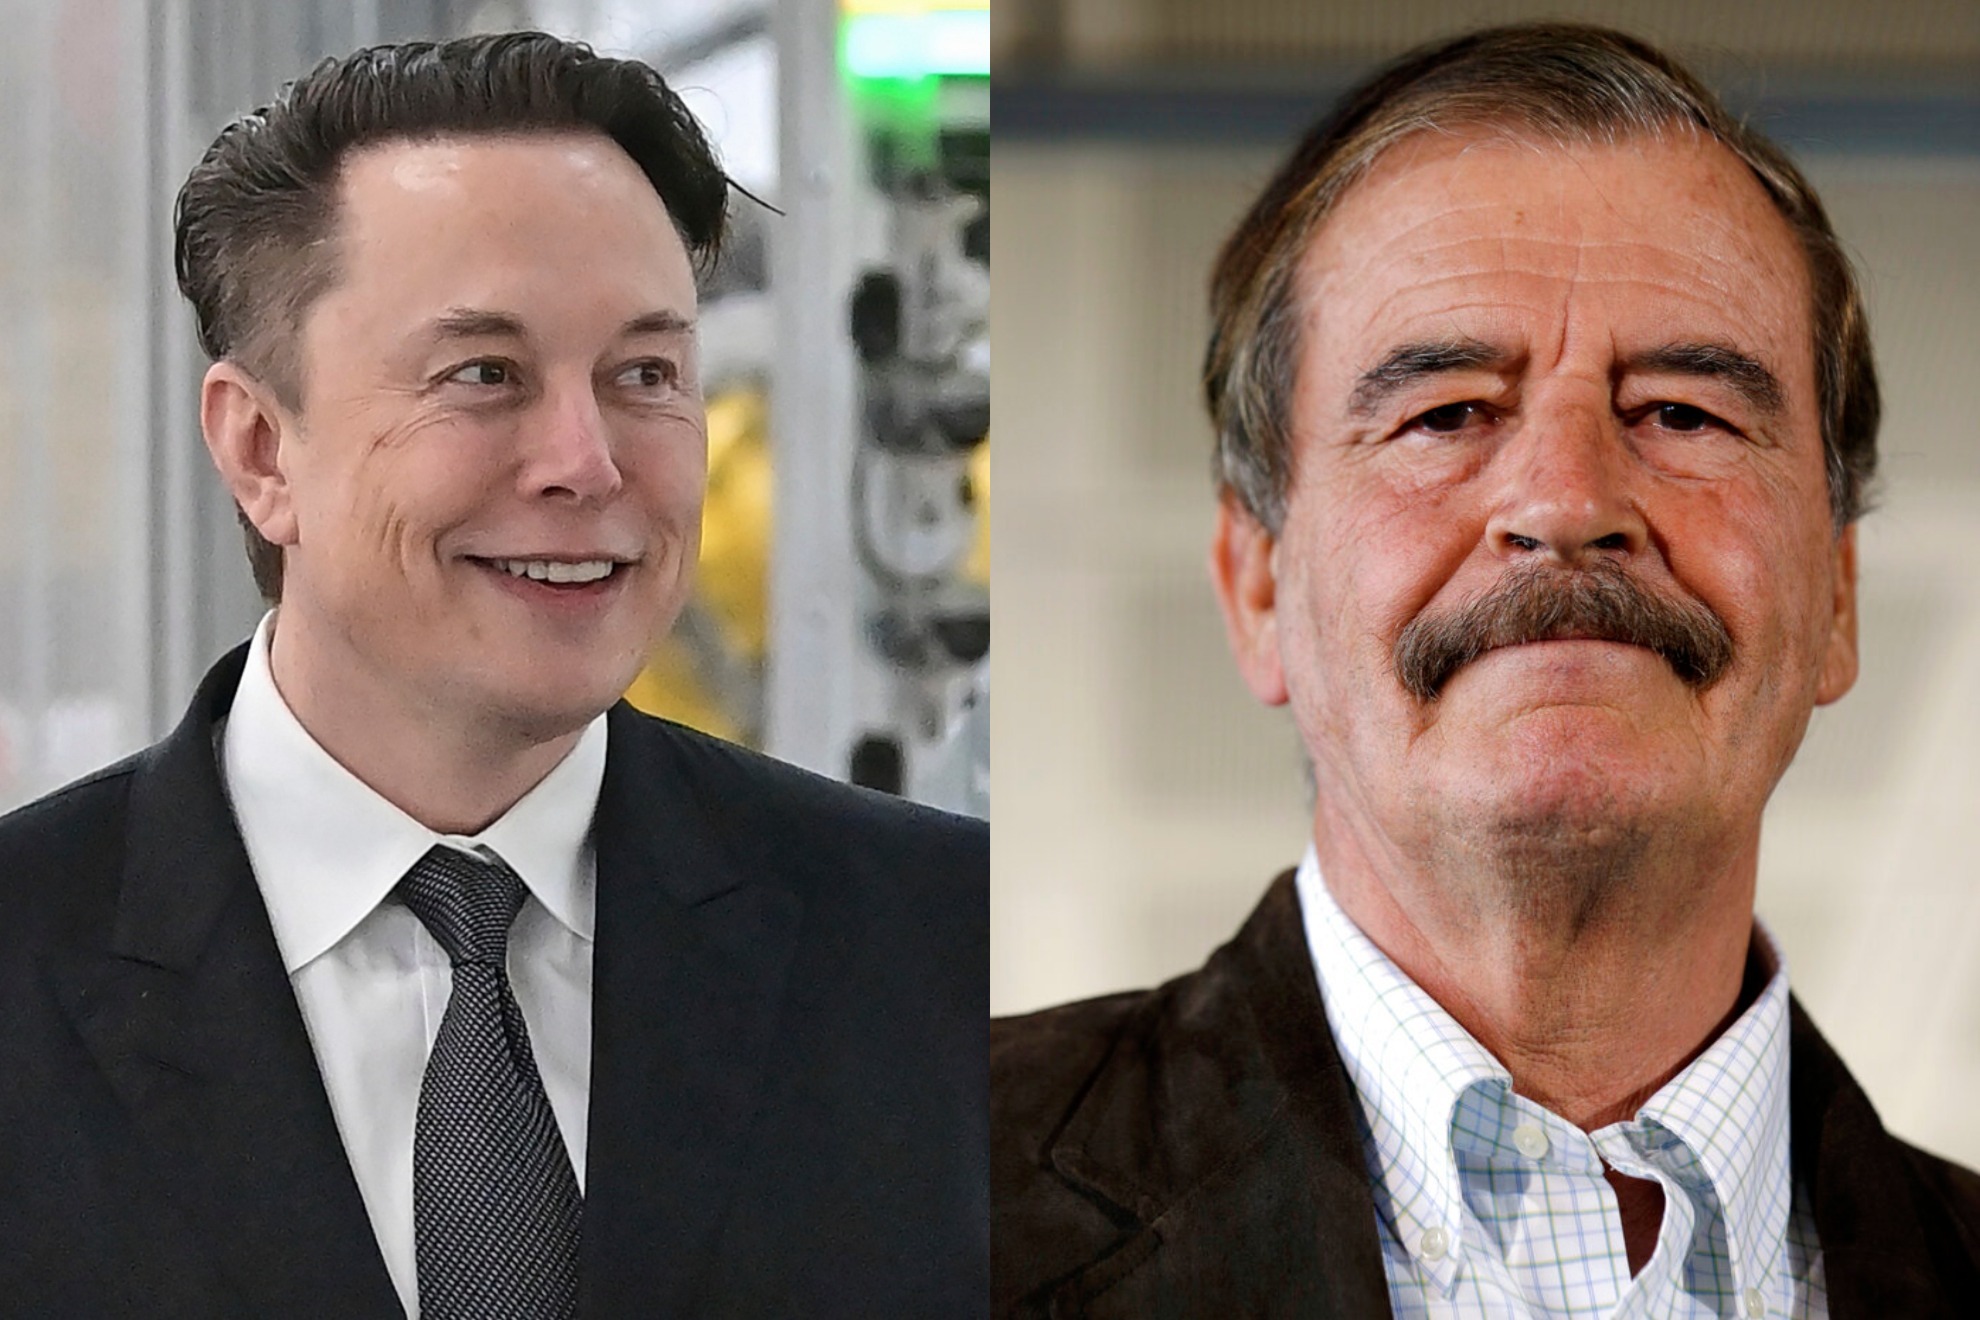 Did Elon Musk shut down Mexicos former presidents account over misogynistic comments?